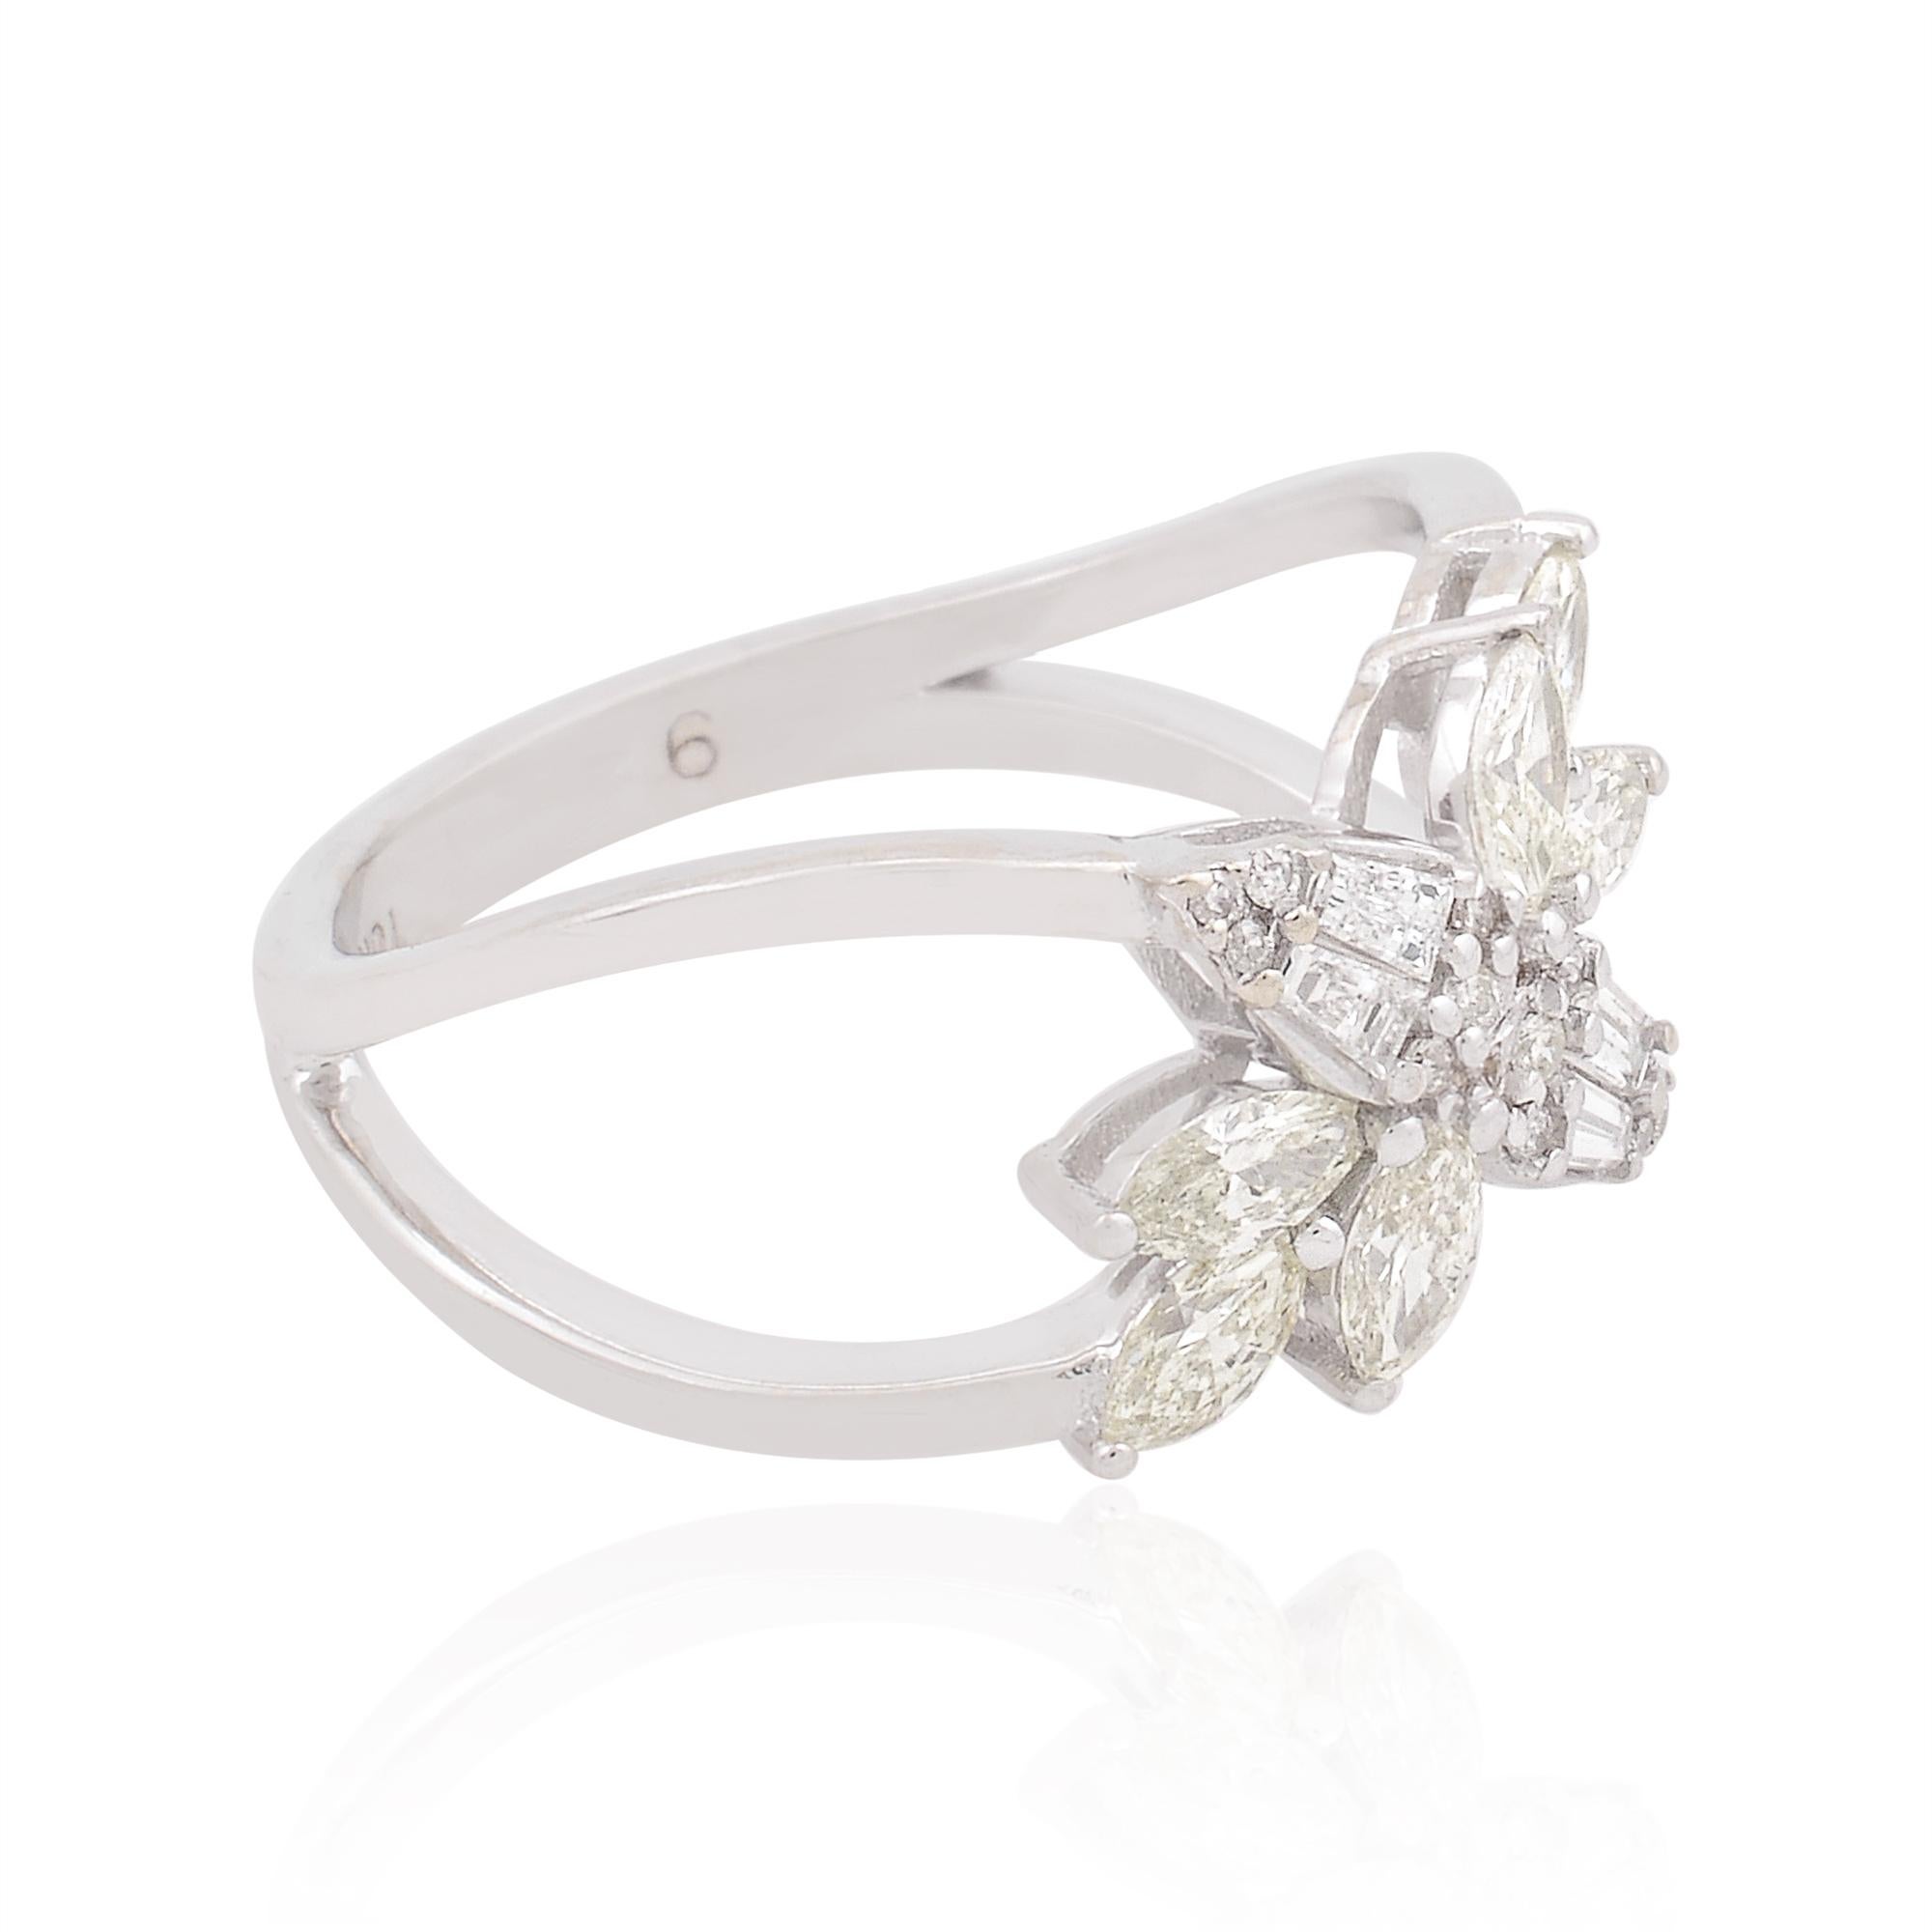 A cocktail ring featuring marquise and baguette diamonds in 18 karat white gold is a statement piece of handmade fine jewelry. The ring typically showcases a combination of marquise-shaped and baguette-shaped diamonds.

Item Code :- SER-21016